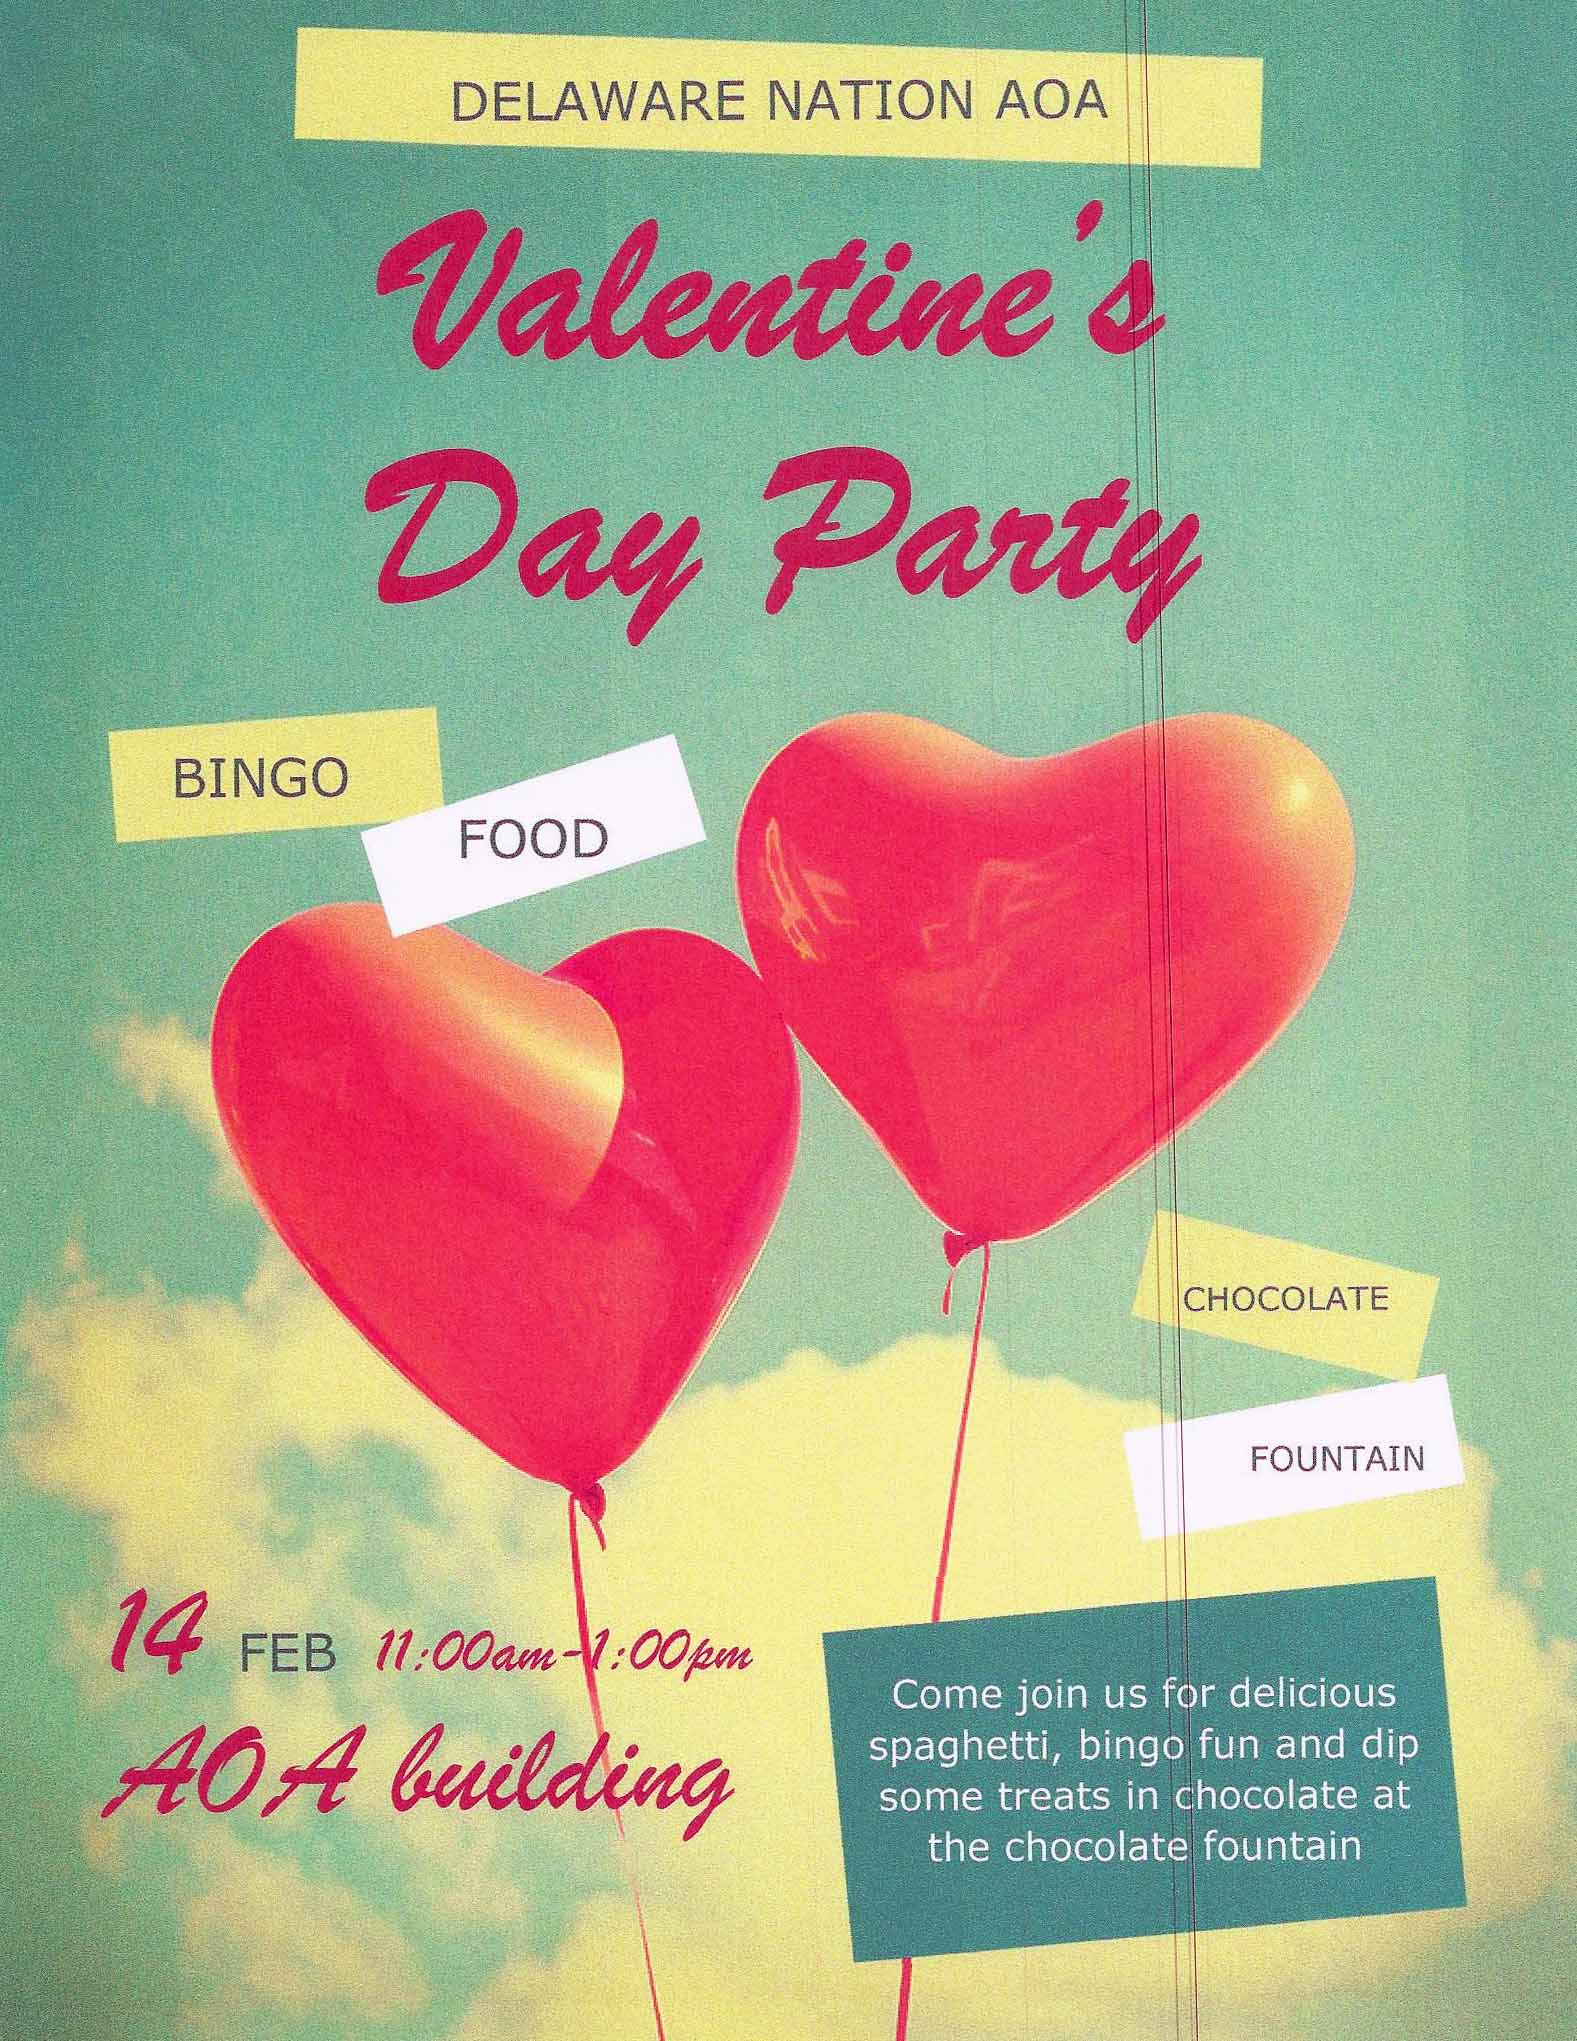 AOA Valentine's Day Party